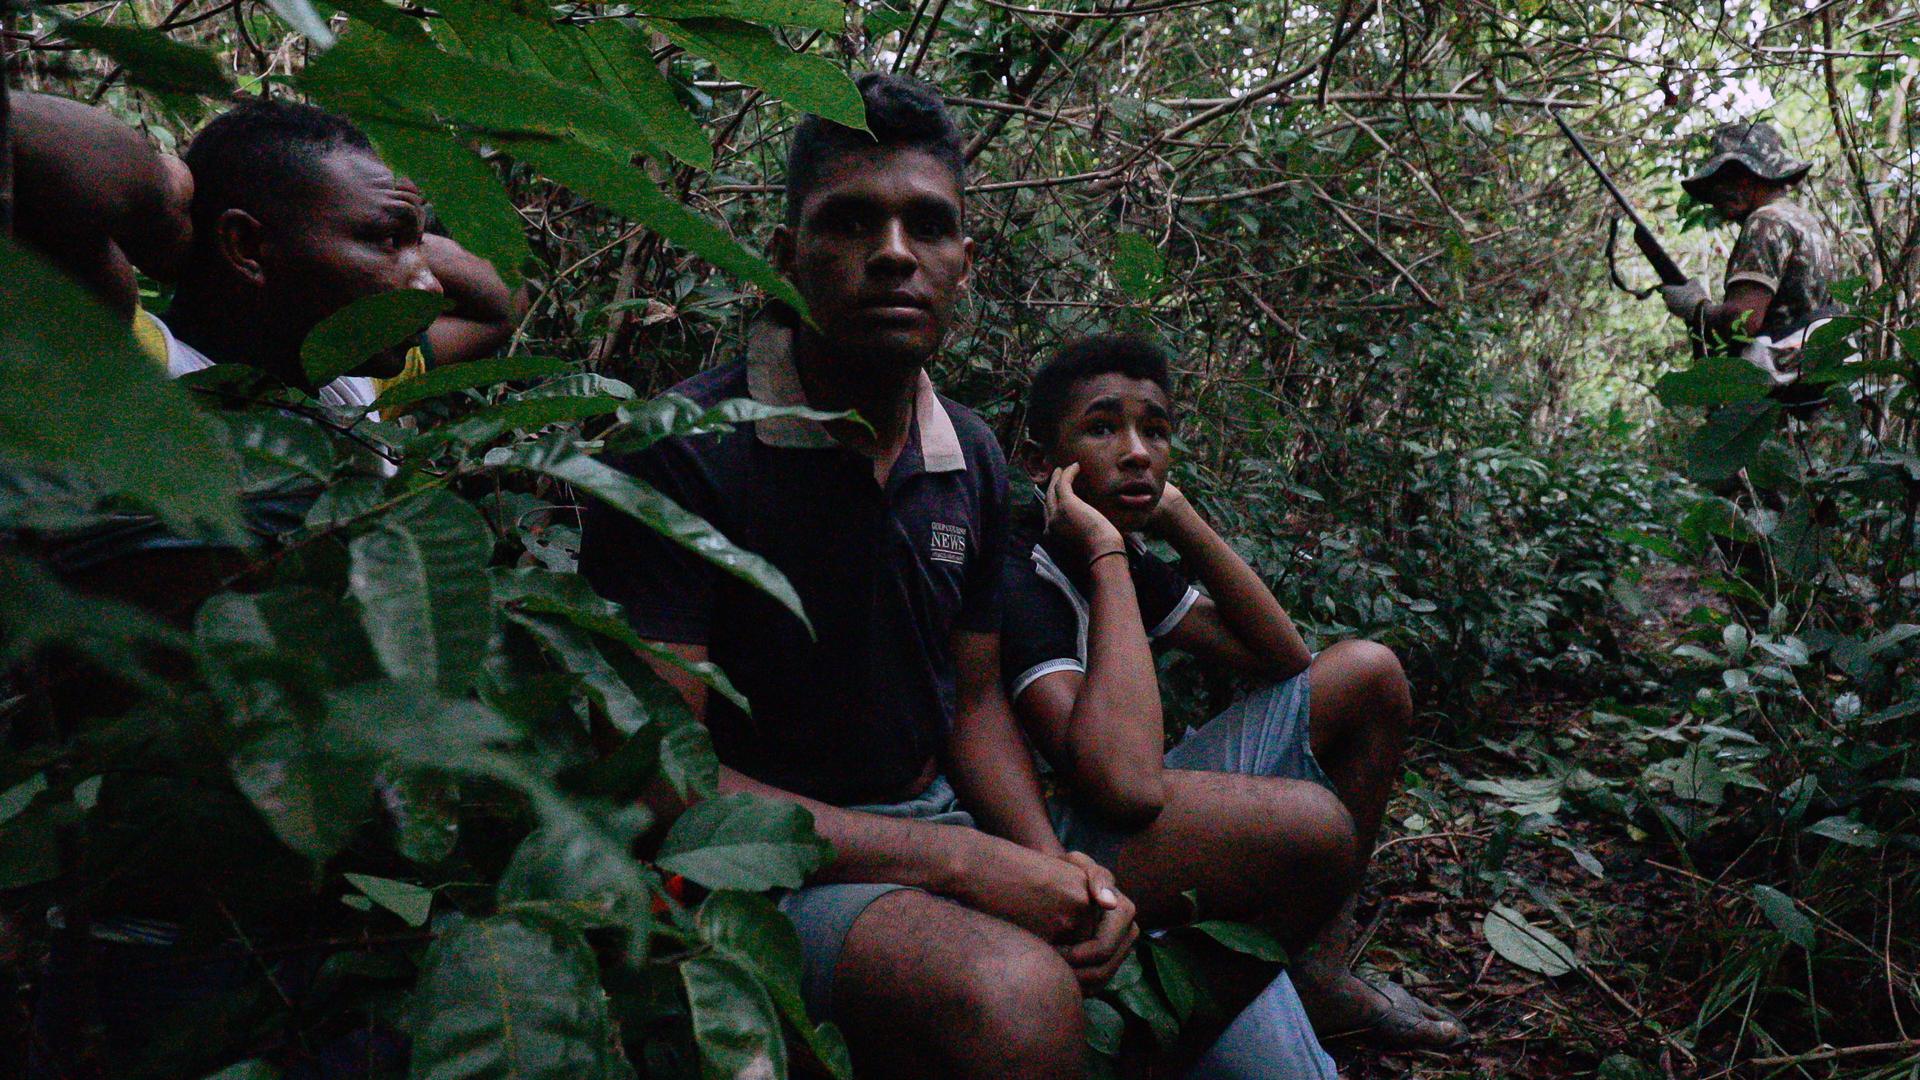 Three boys are on their knees in the jungle, with their hands clasped behind their heads.